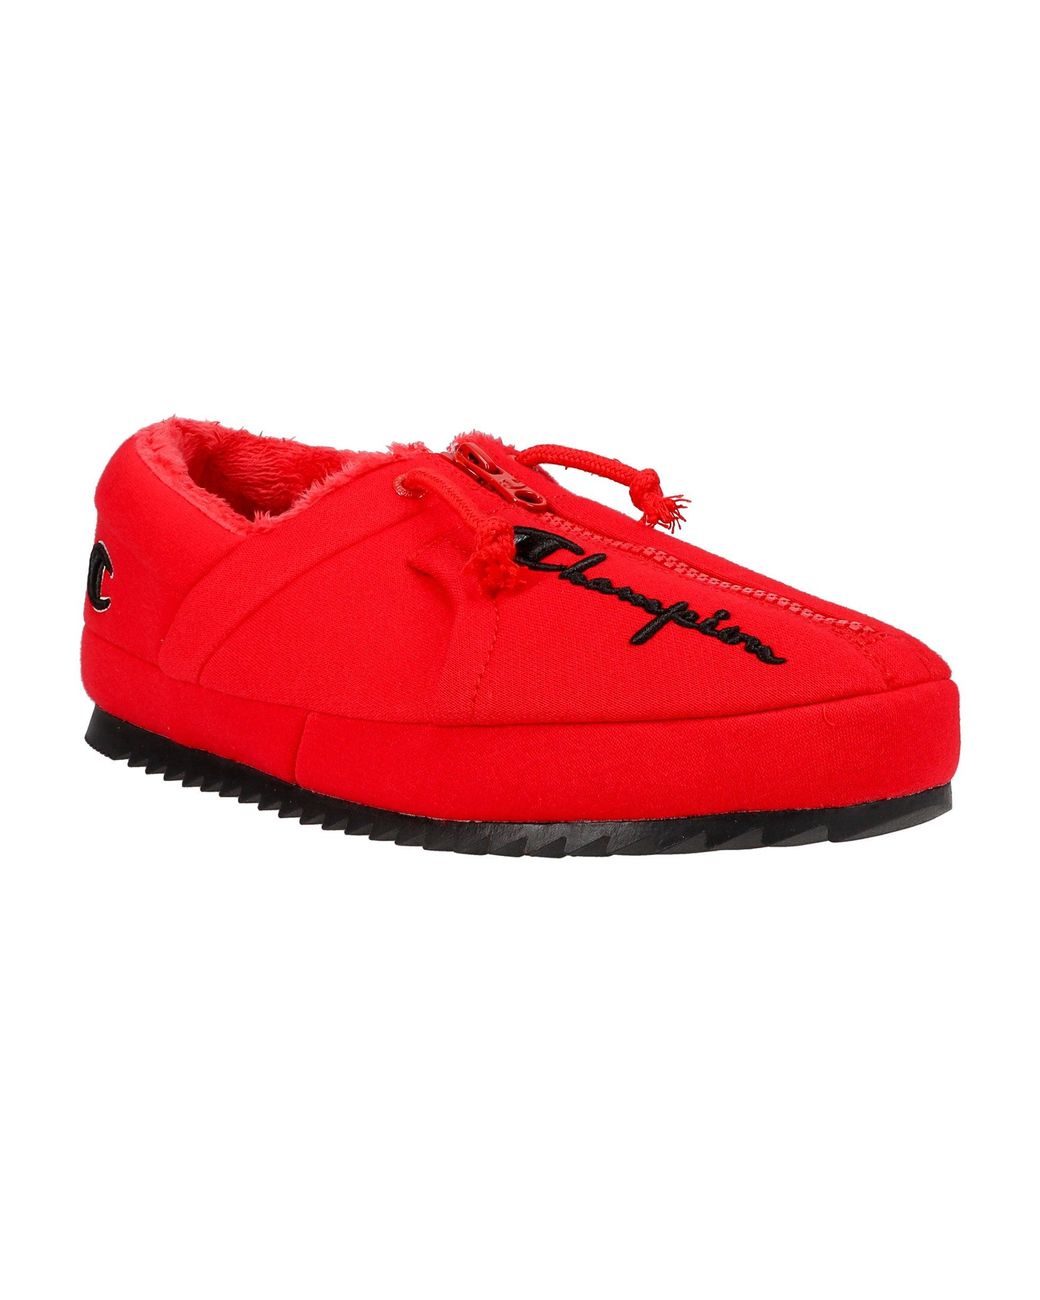 Champion Rubber University Zip Slippers in Scarlet (Red) for Men - Lyst